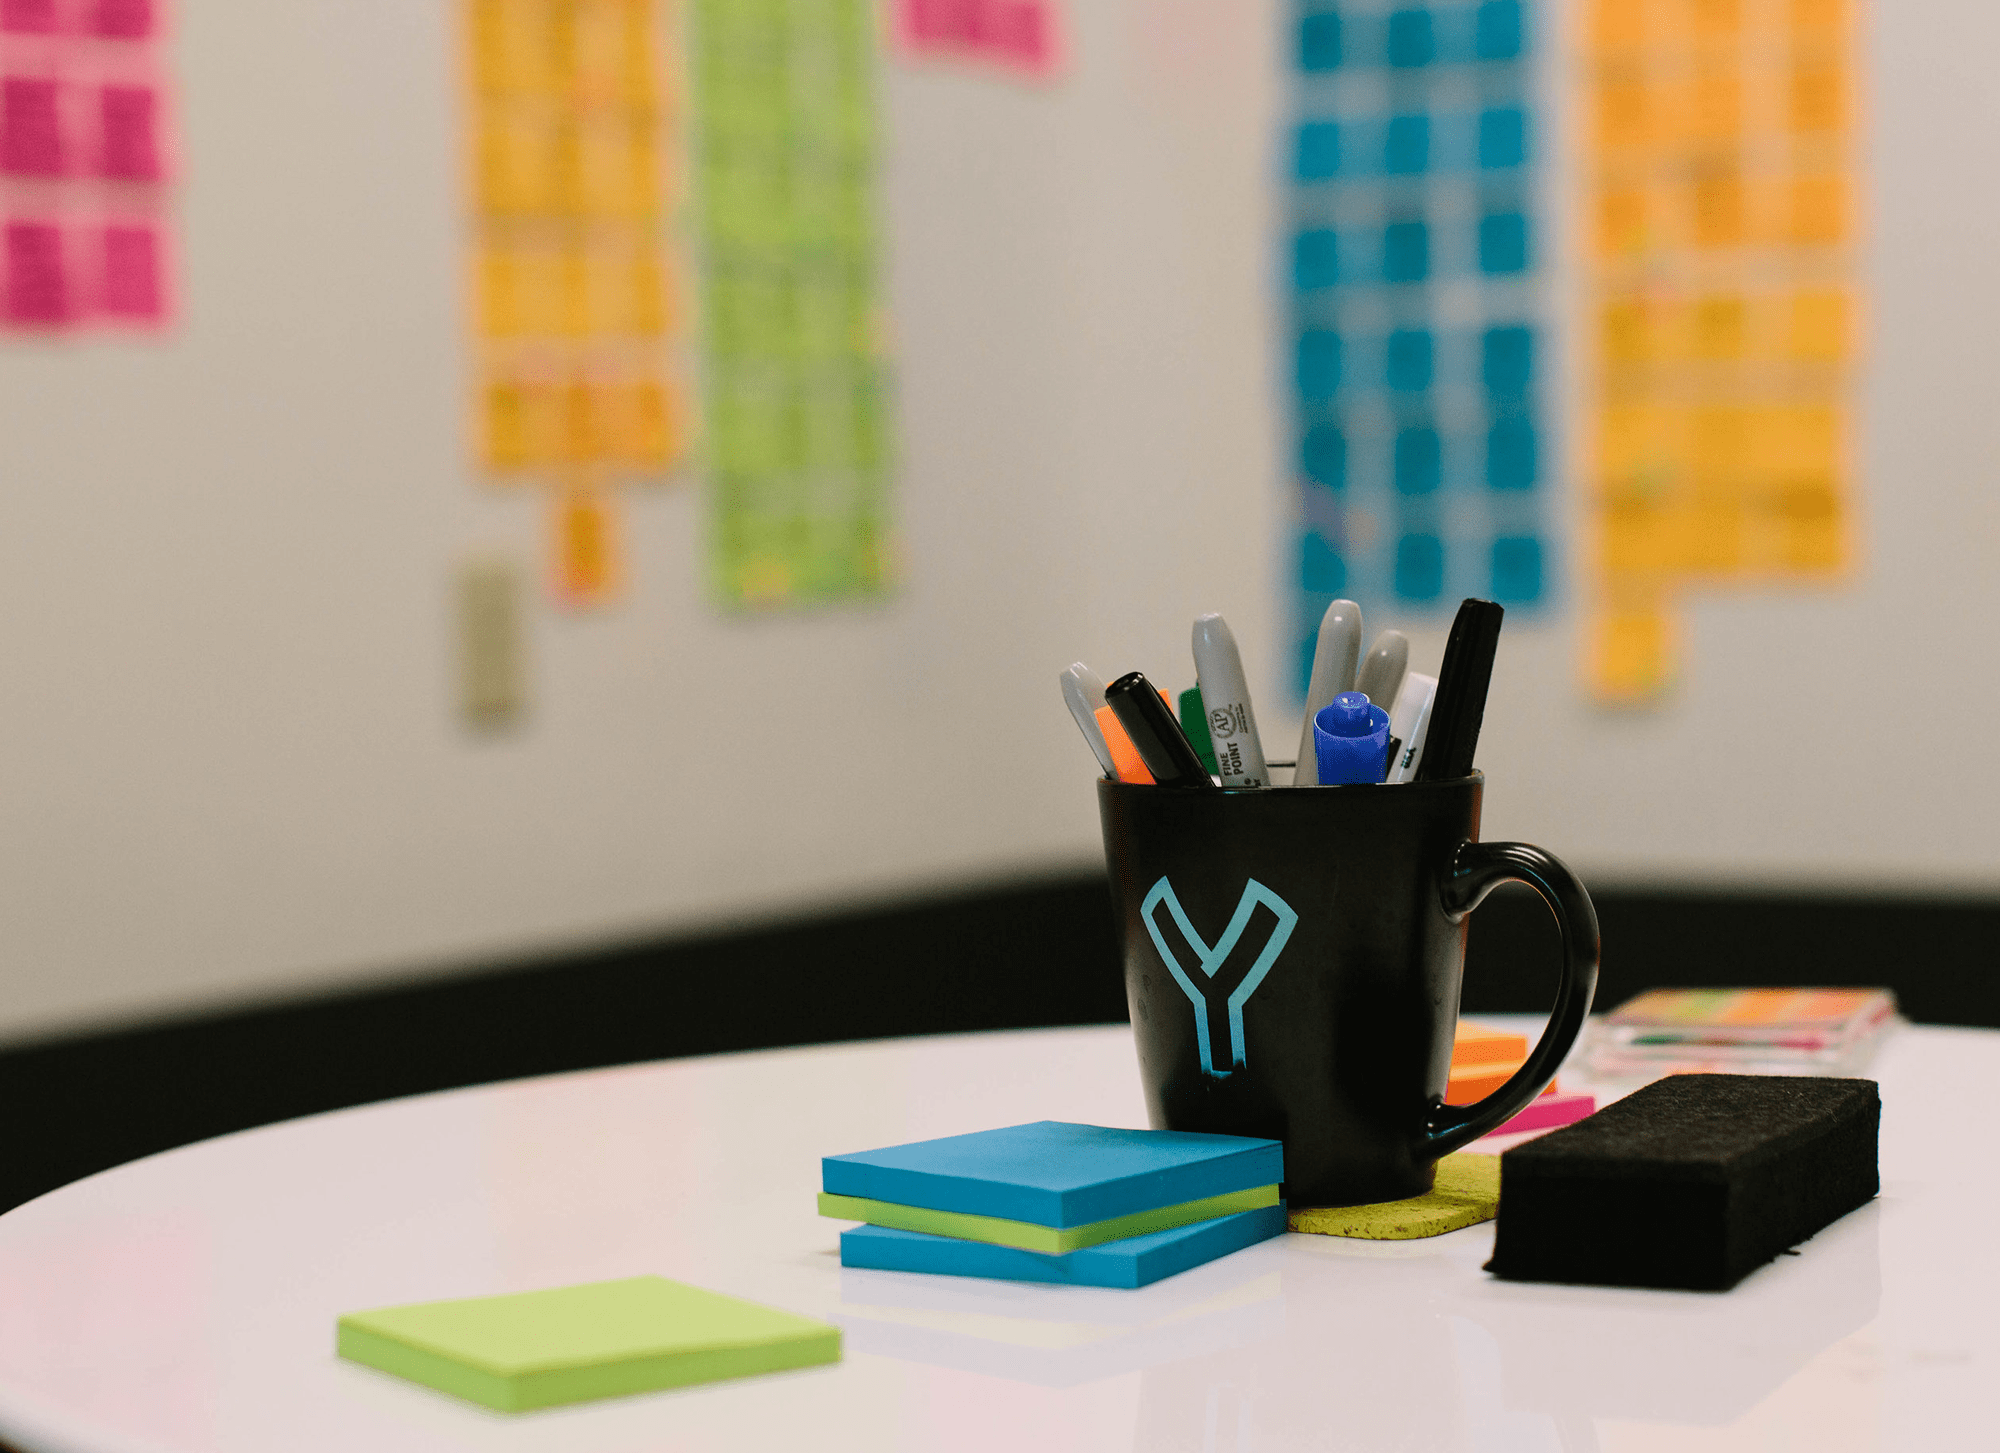 Slingshot Mug on Table with Post It notes